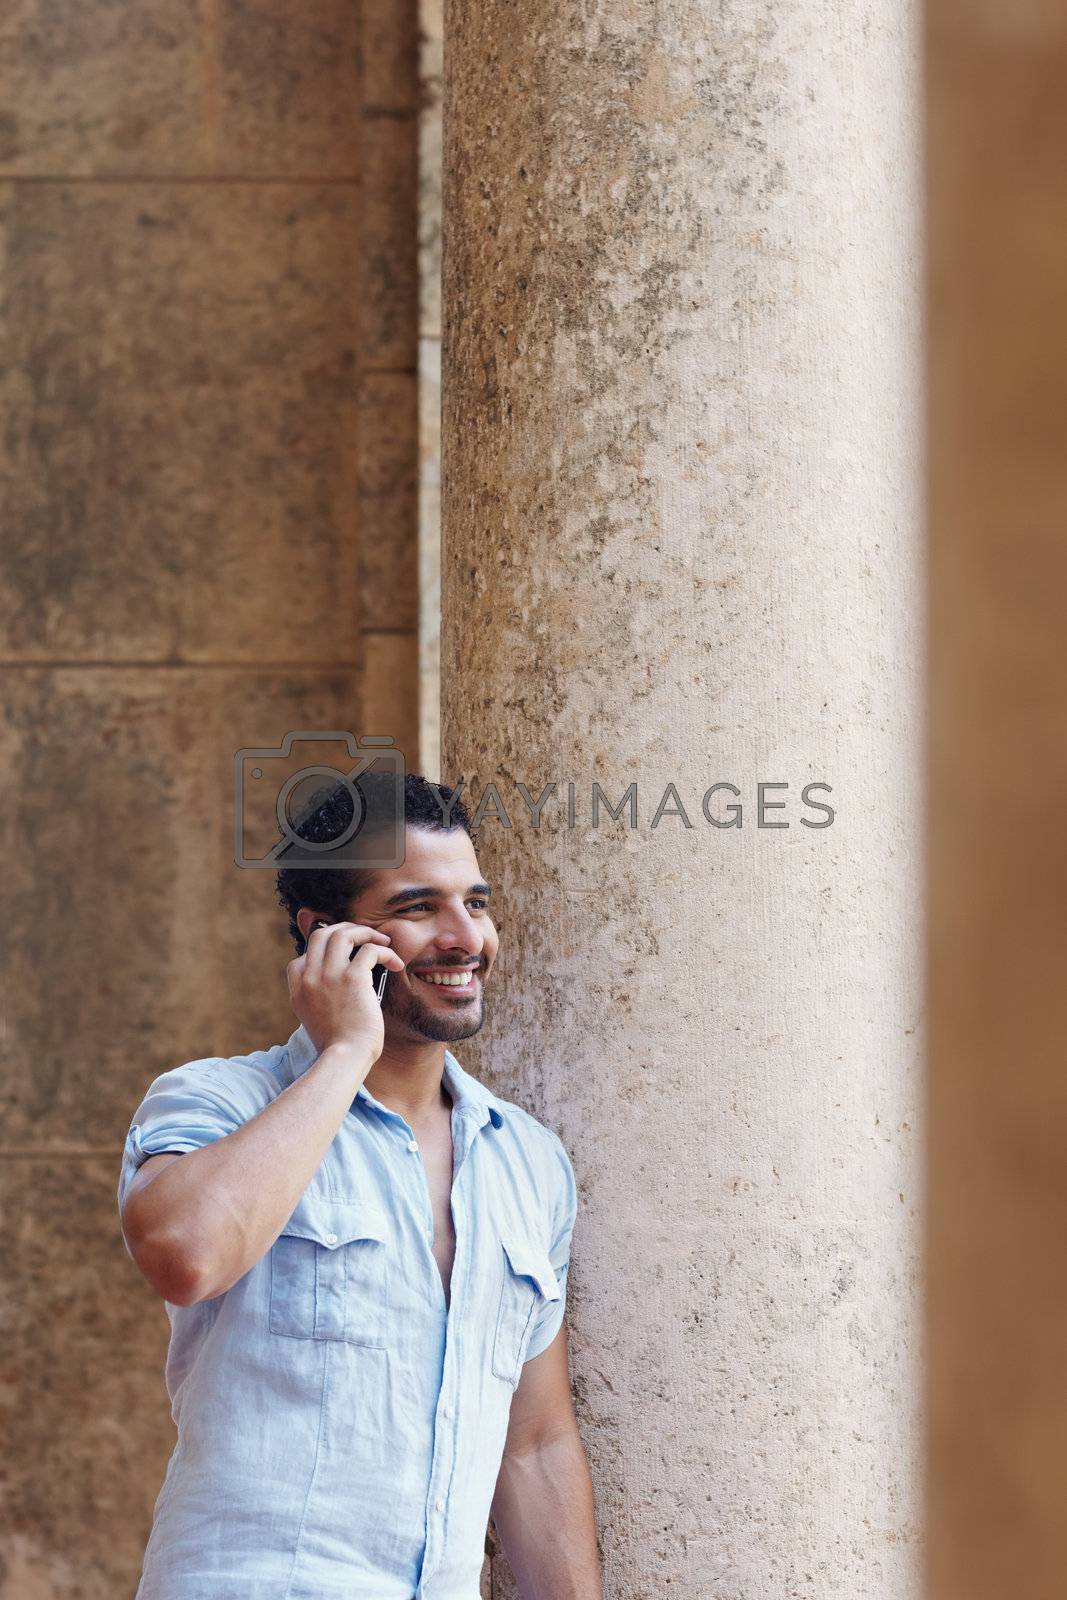 Royalty free image of man talking on cellphone by diego_cervo